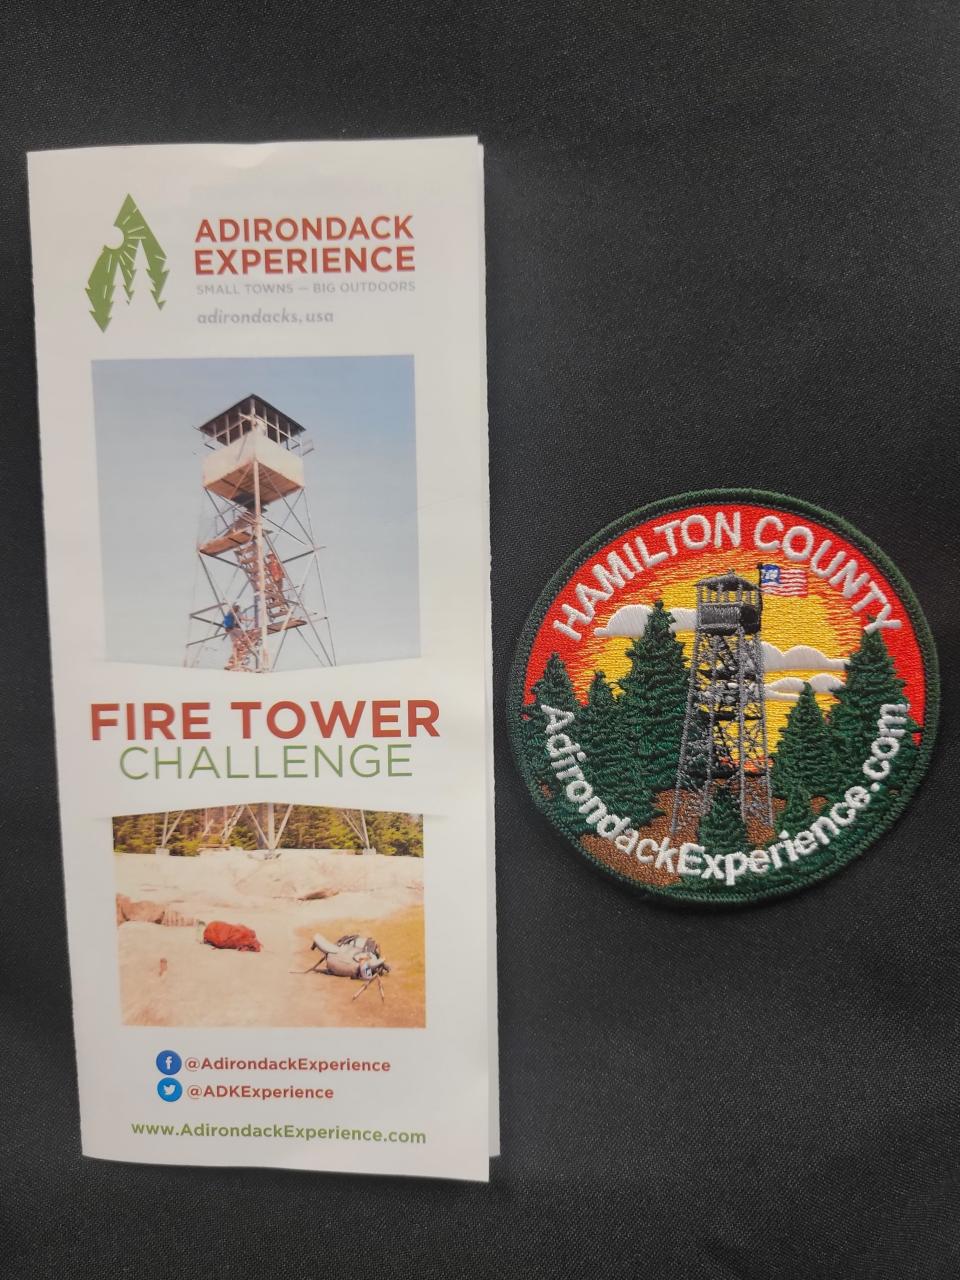 Firetower Challenge brochure and patch